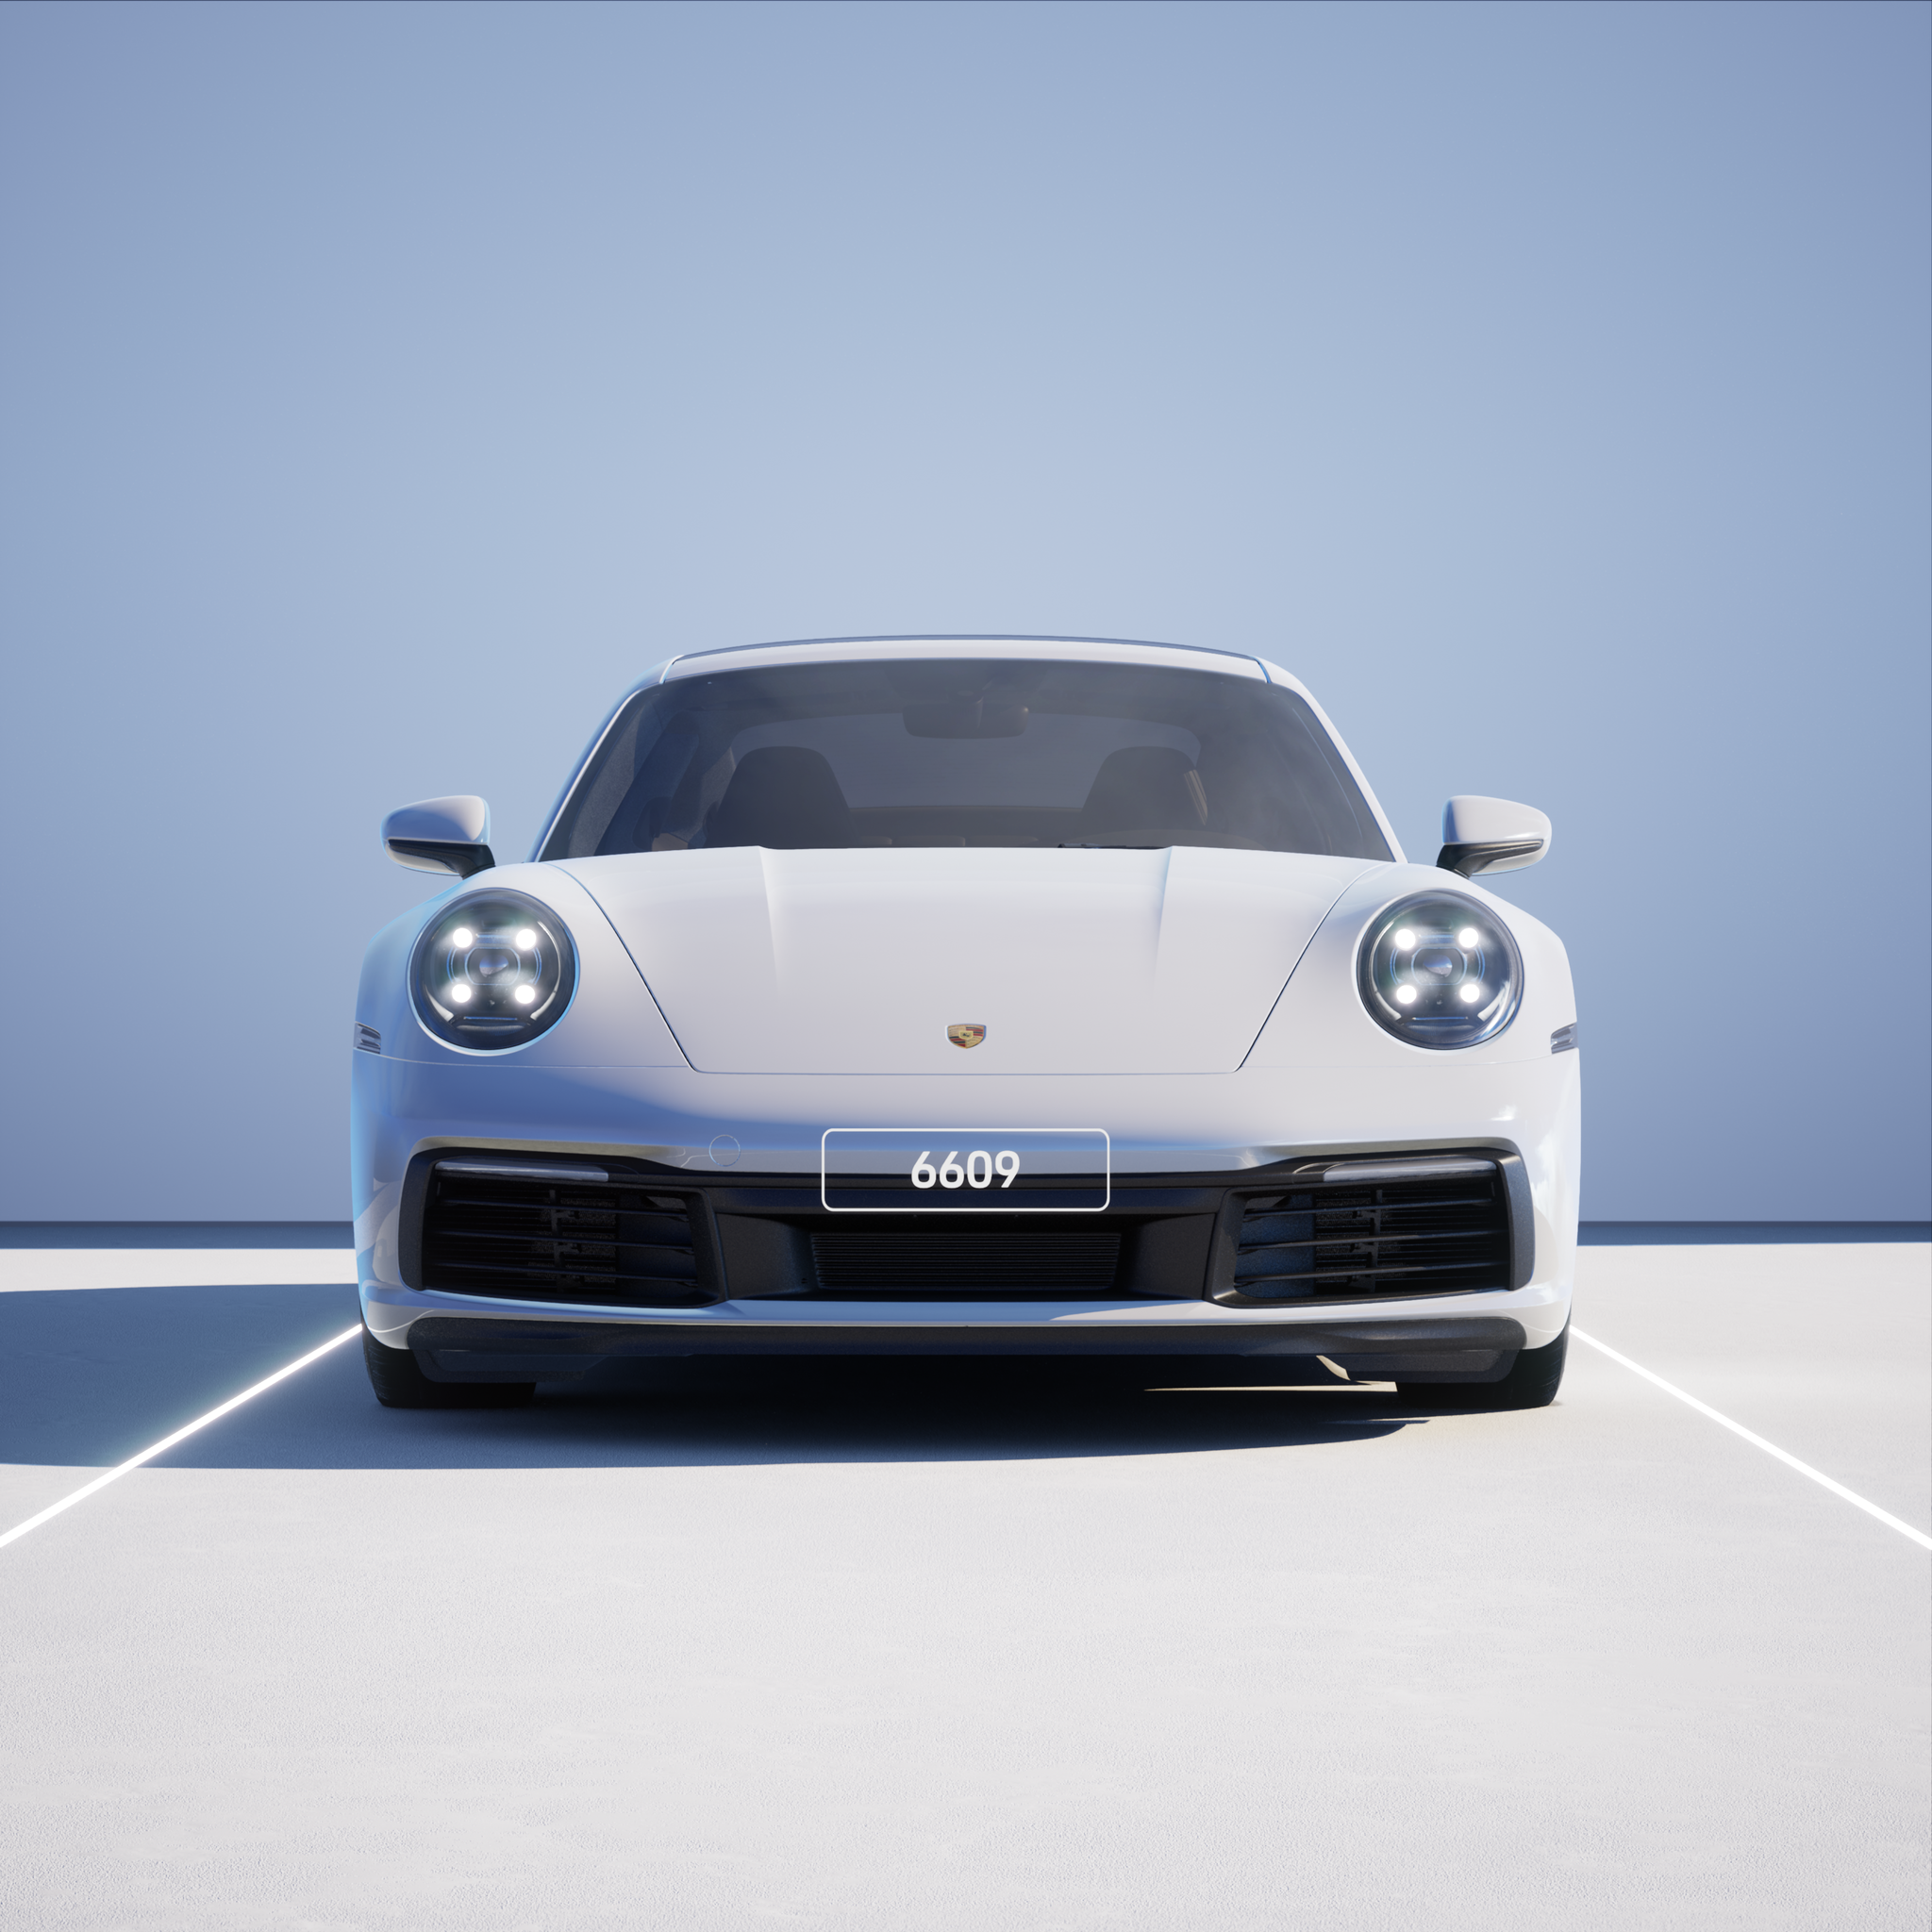 The PORSCHΞ 911 6609 image in phase